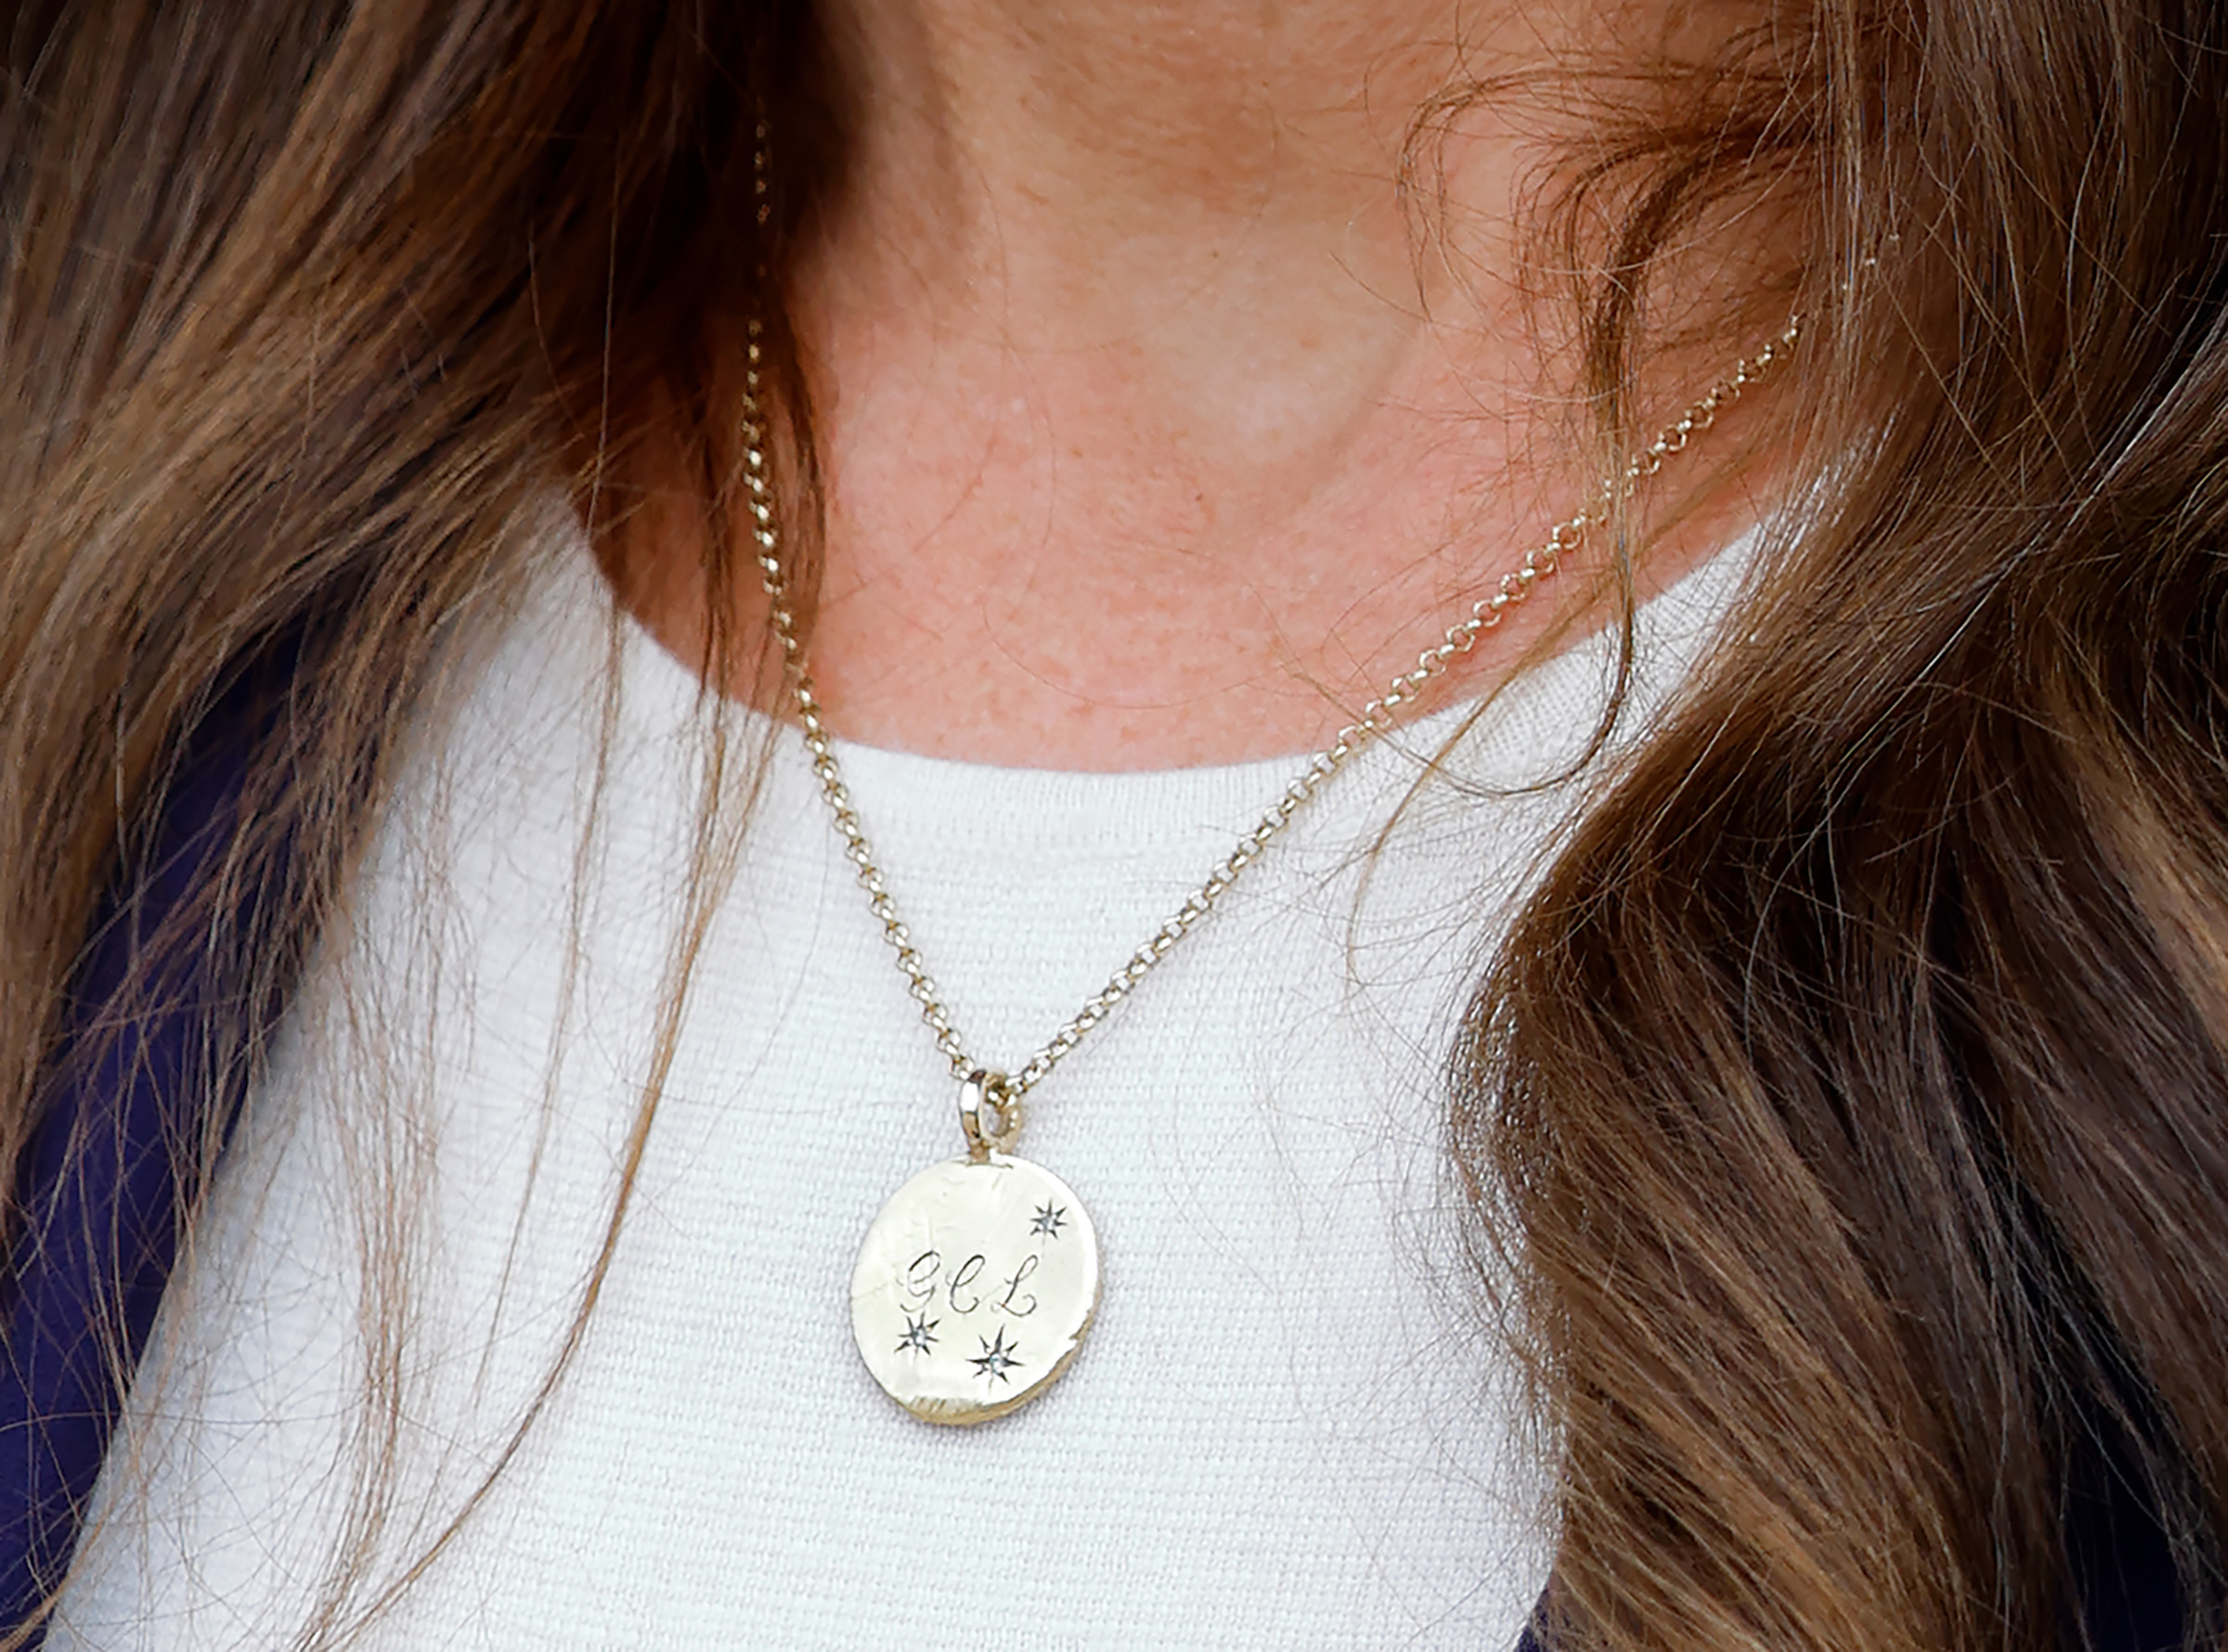 Catherine, Princess of Wales, wears a necklace bearing the initials G, C and L of her children Prince George of Wales, Princess Charlotte of Wales and Prince Louis of Wales.